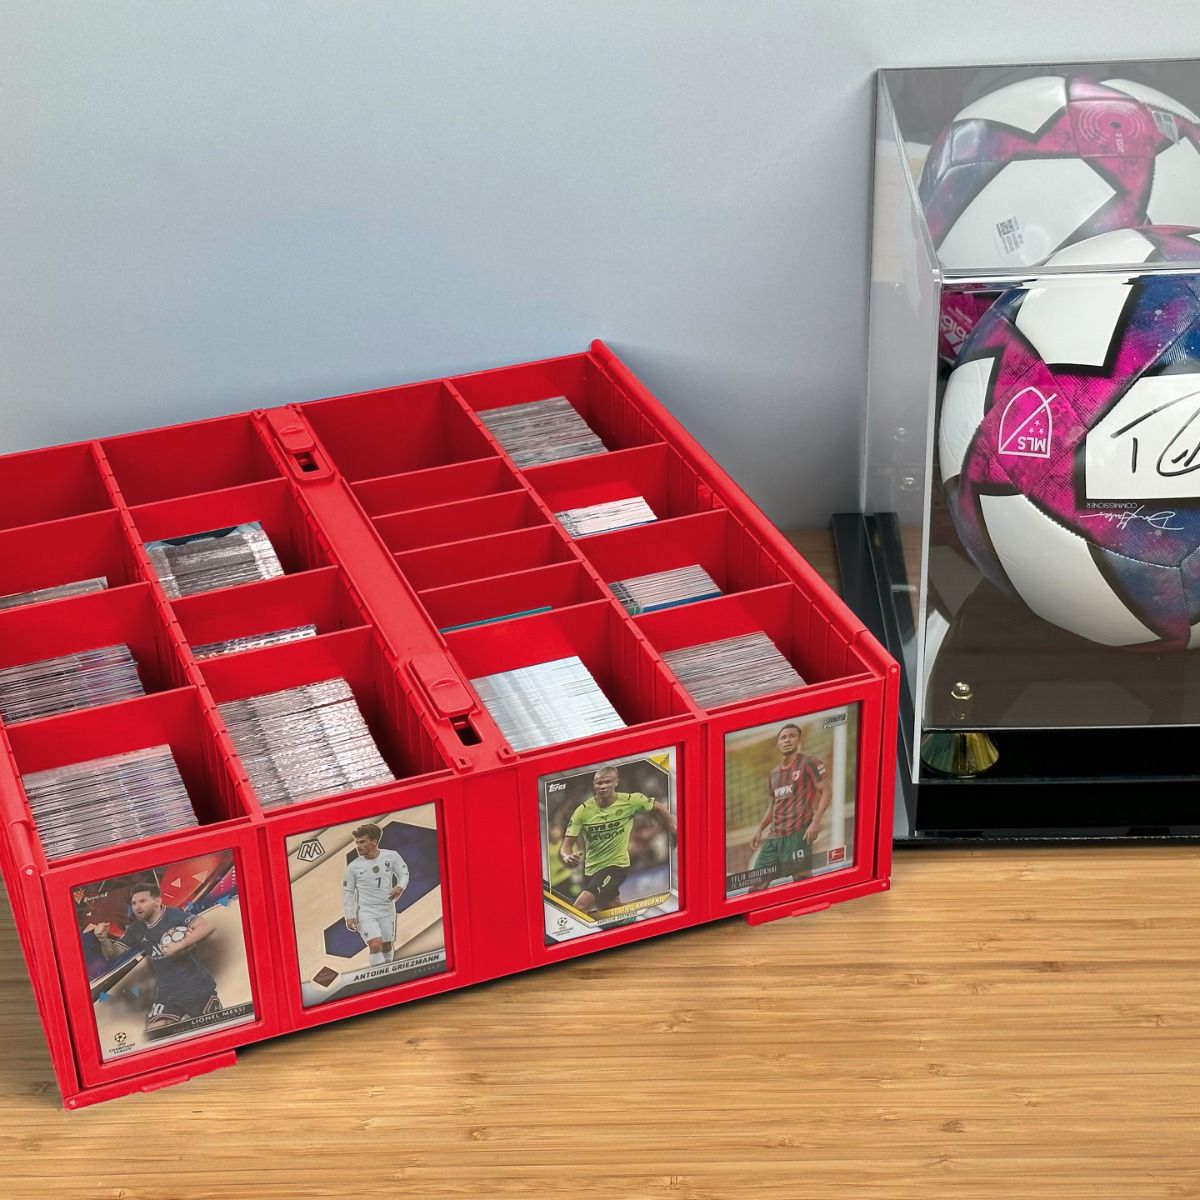 BCW Collectible Card Storage Bin - 3200 Card (Red) 722626620164 - 1-CCB-3200-RED - King Card Canada